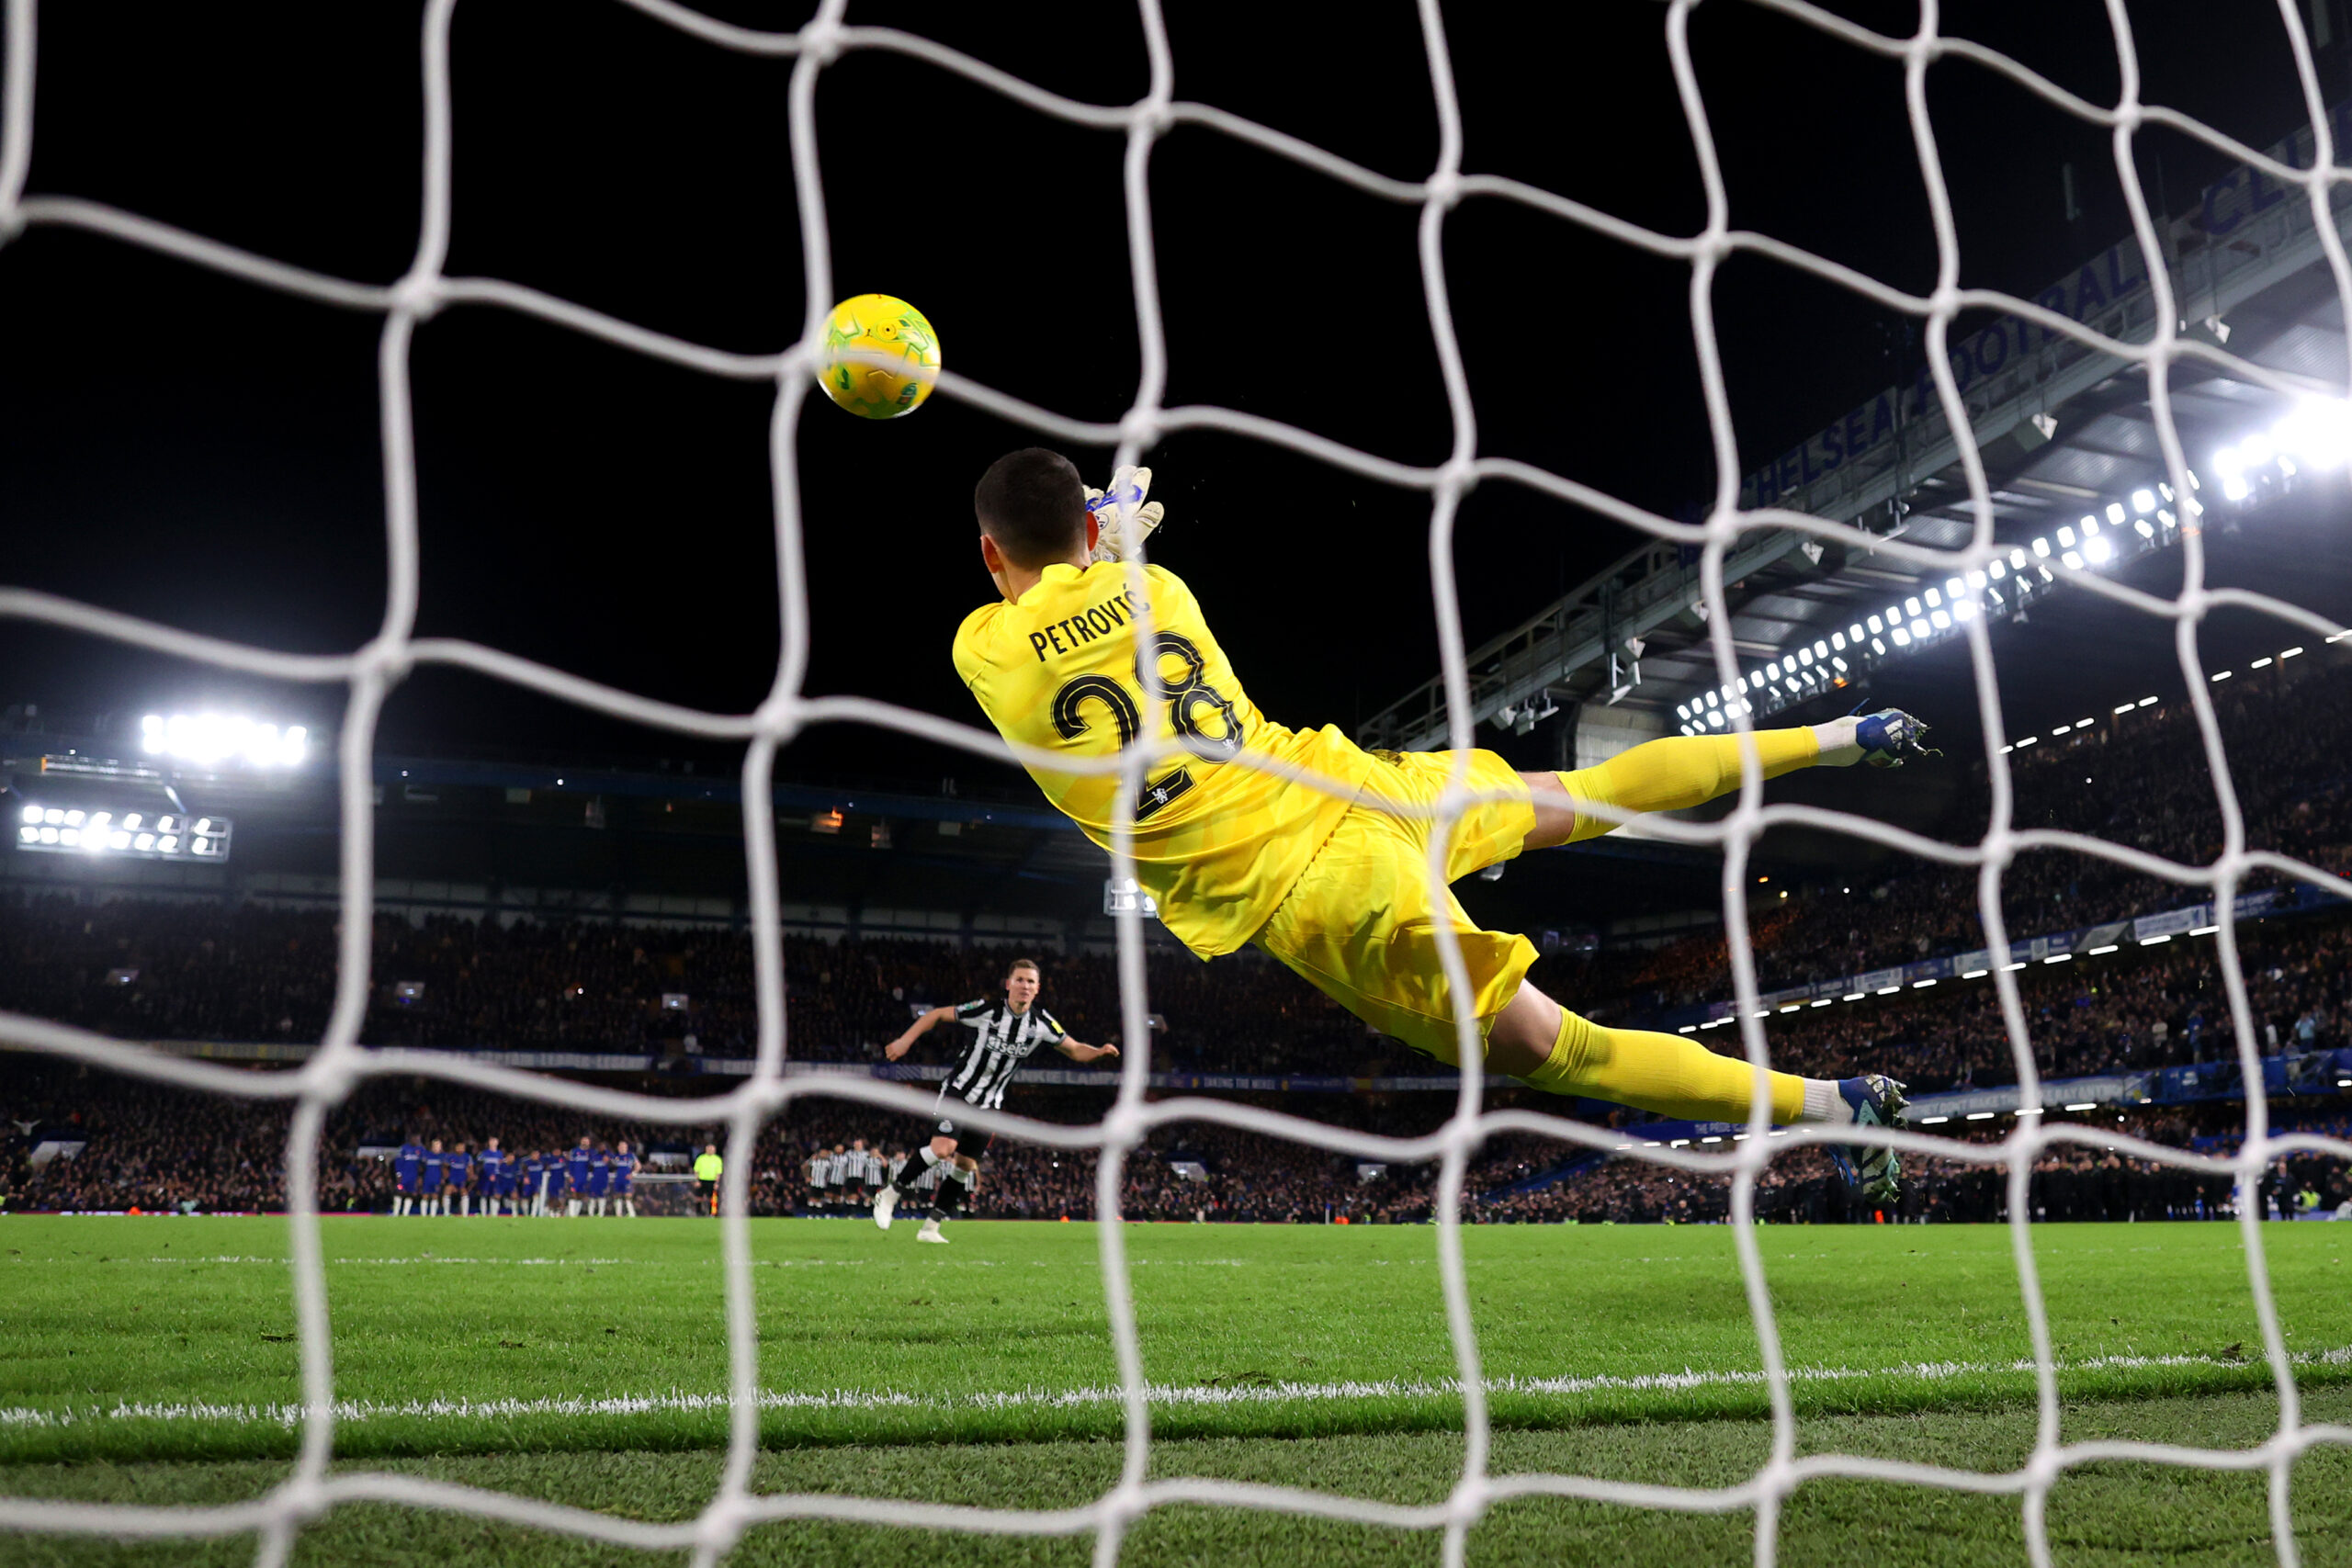 Djordje Petrovic has been a shining light for Chelsea (Photo by Julian Finney/Getty Images)